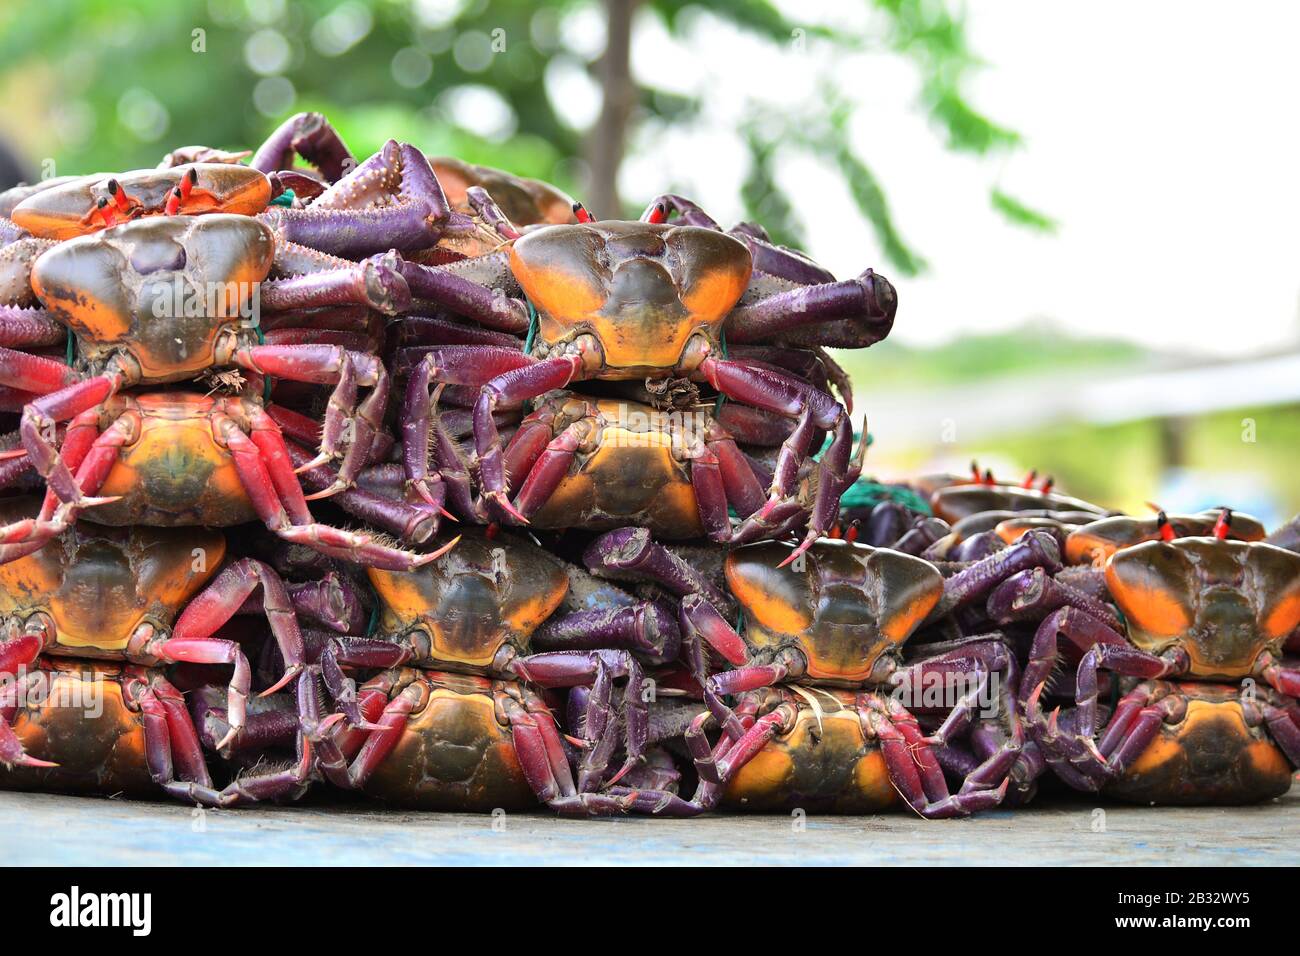 Colorful crabs for sale at outdoor food market in Ecuador Stock Photo